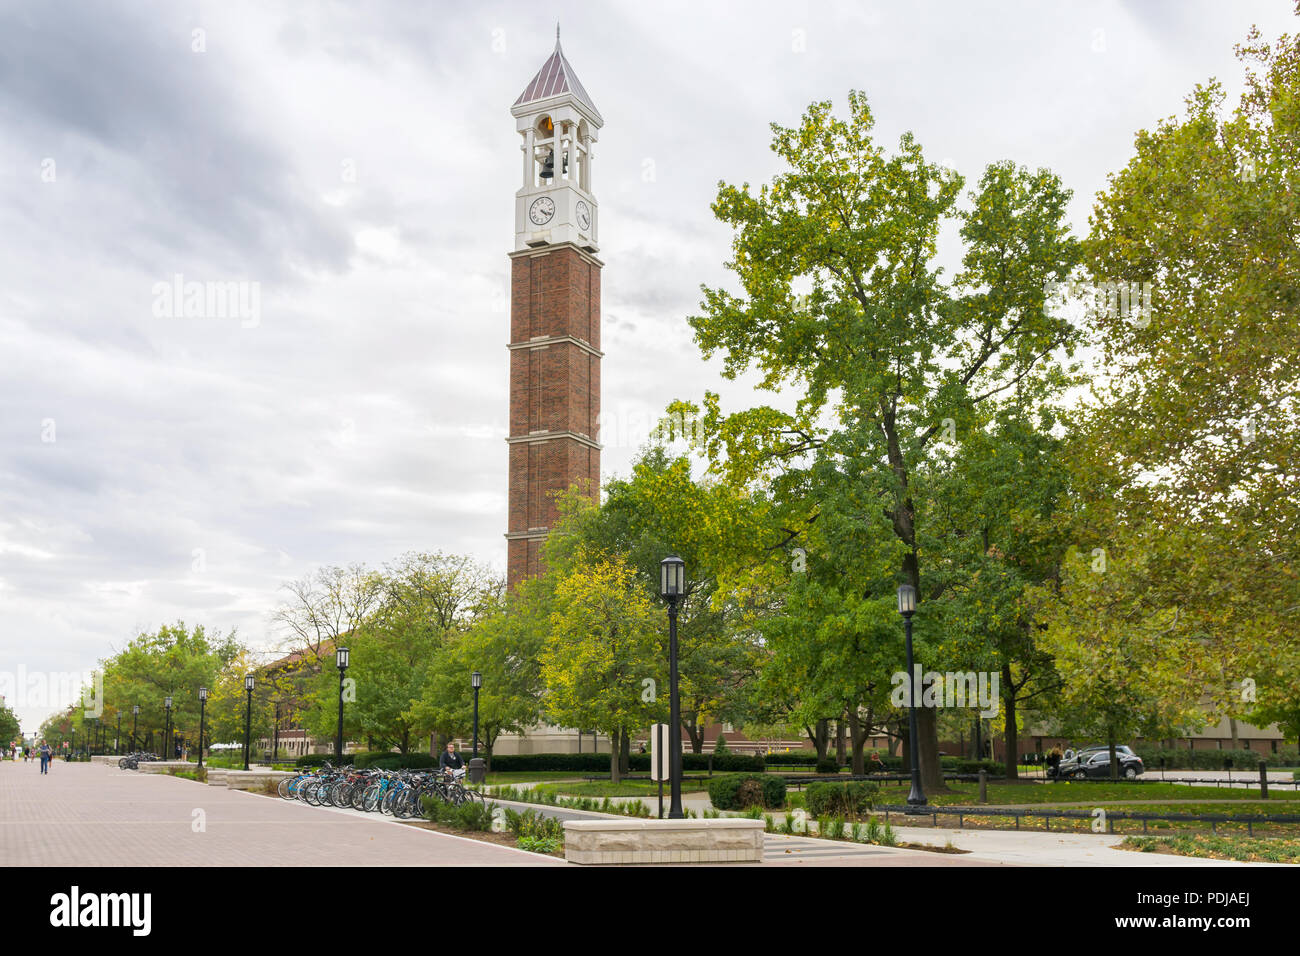 WEST LAFAYETTE, IN/USA - OCTOBER 22, 2017: Purdue Bell Tower on the campus of the Purdue University. Stock Photo